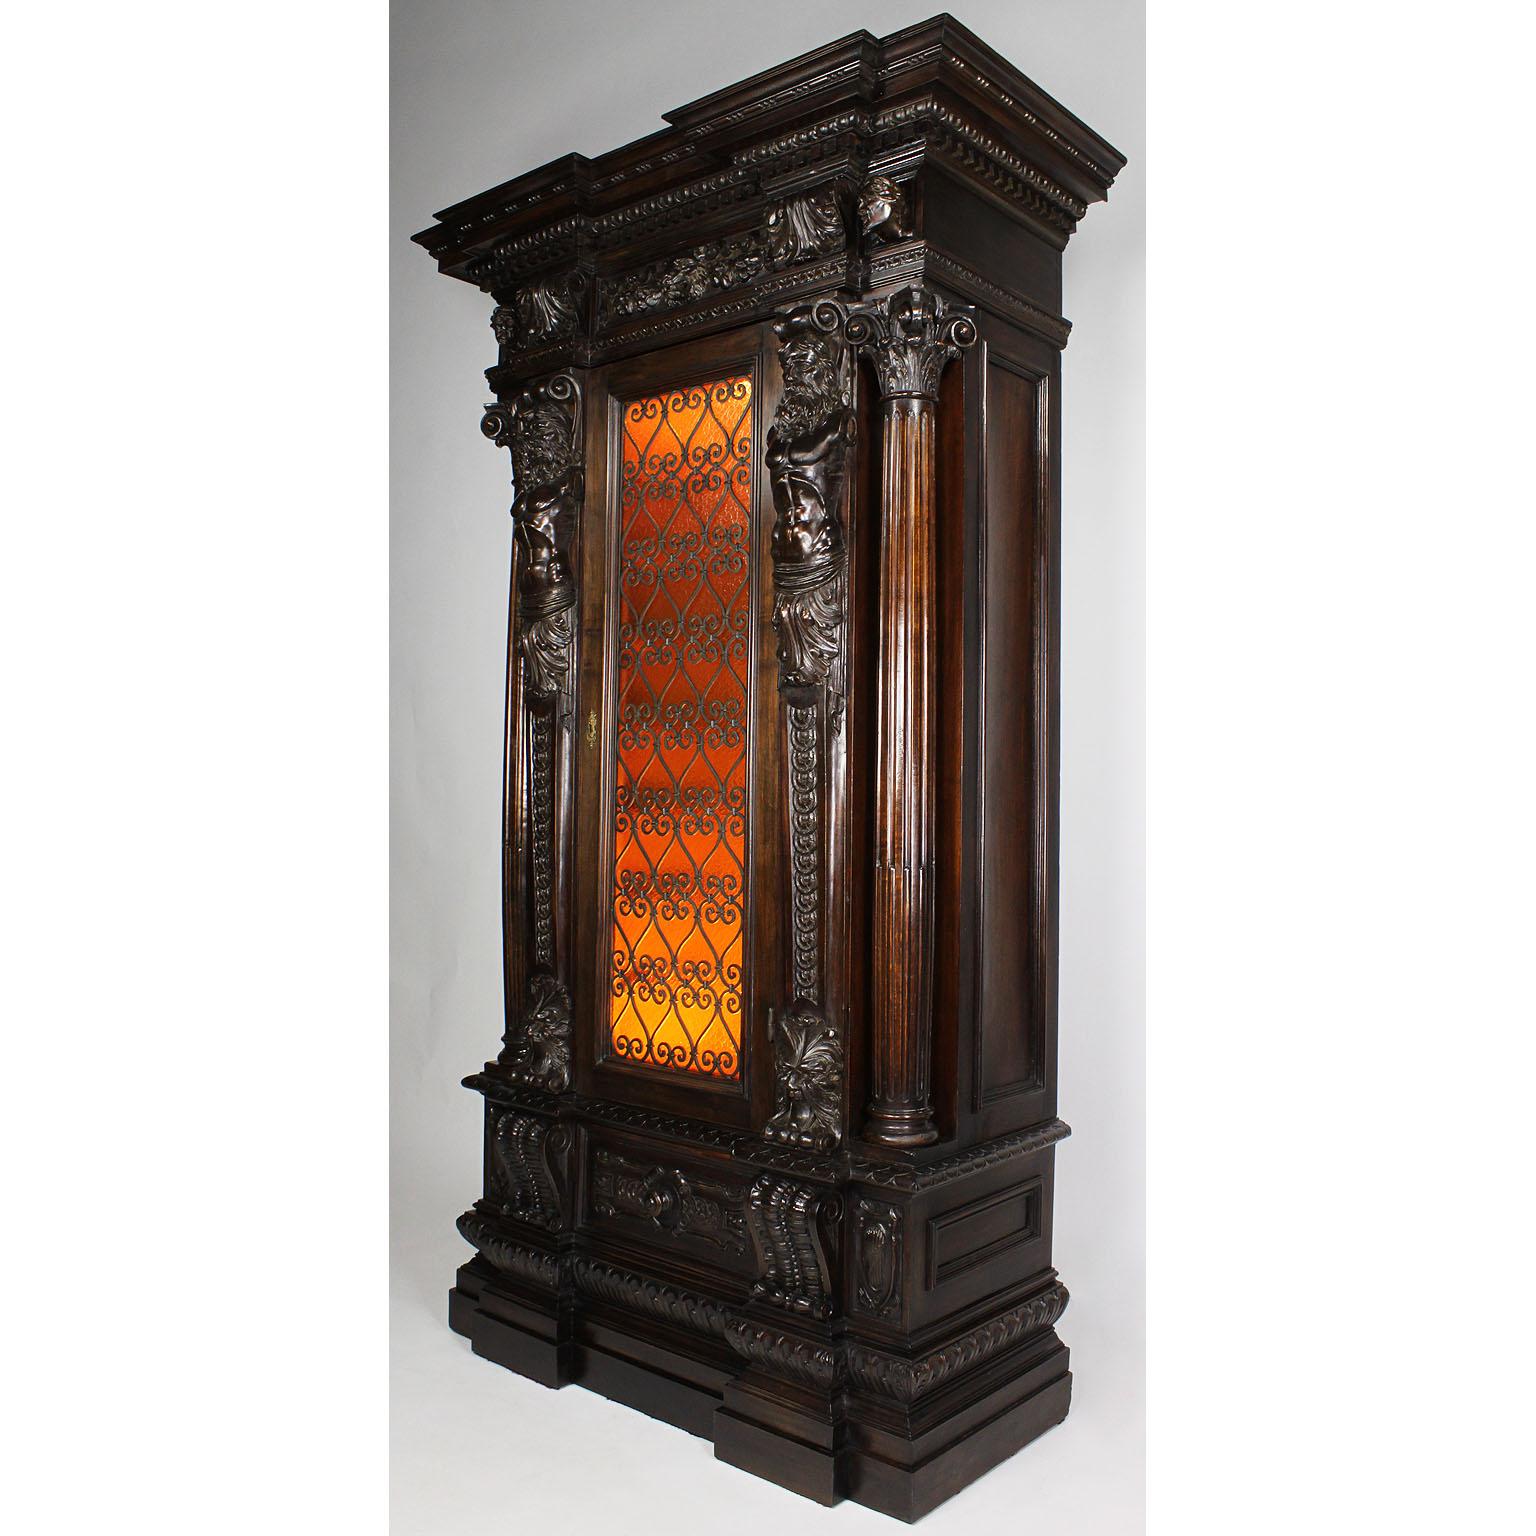 A fine Italian 19th-20th century Baroque Revival style carved walnut figural wine - storage cabinet. The elongated carved body centered with a single door with an amber glass inset and a wrought iron grill decoration, concealing eight interior